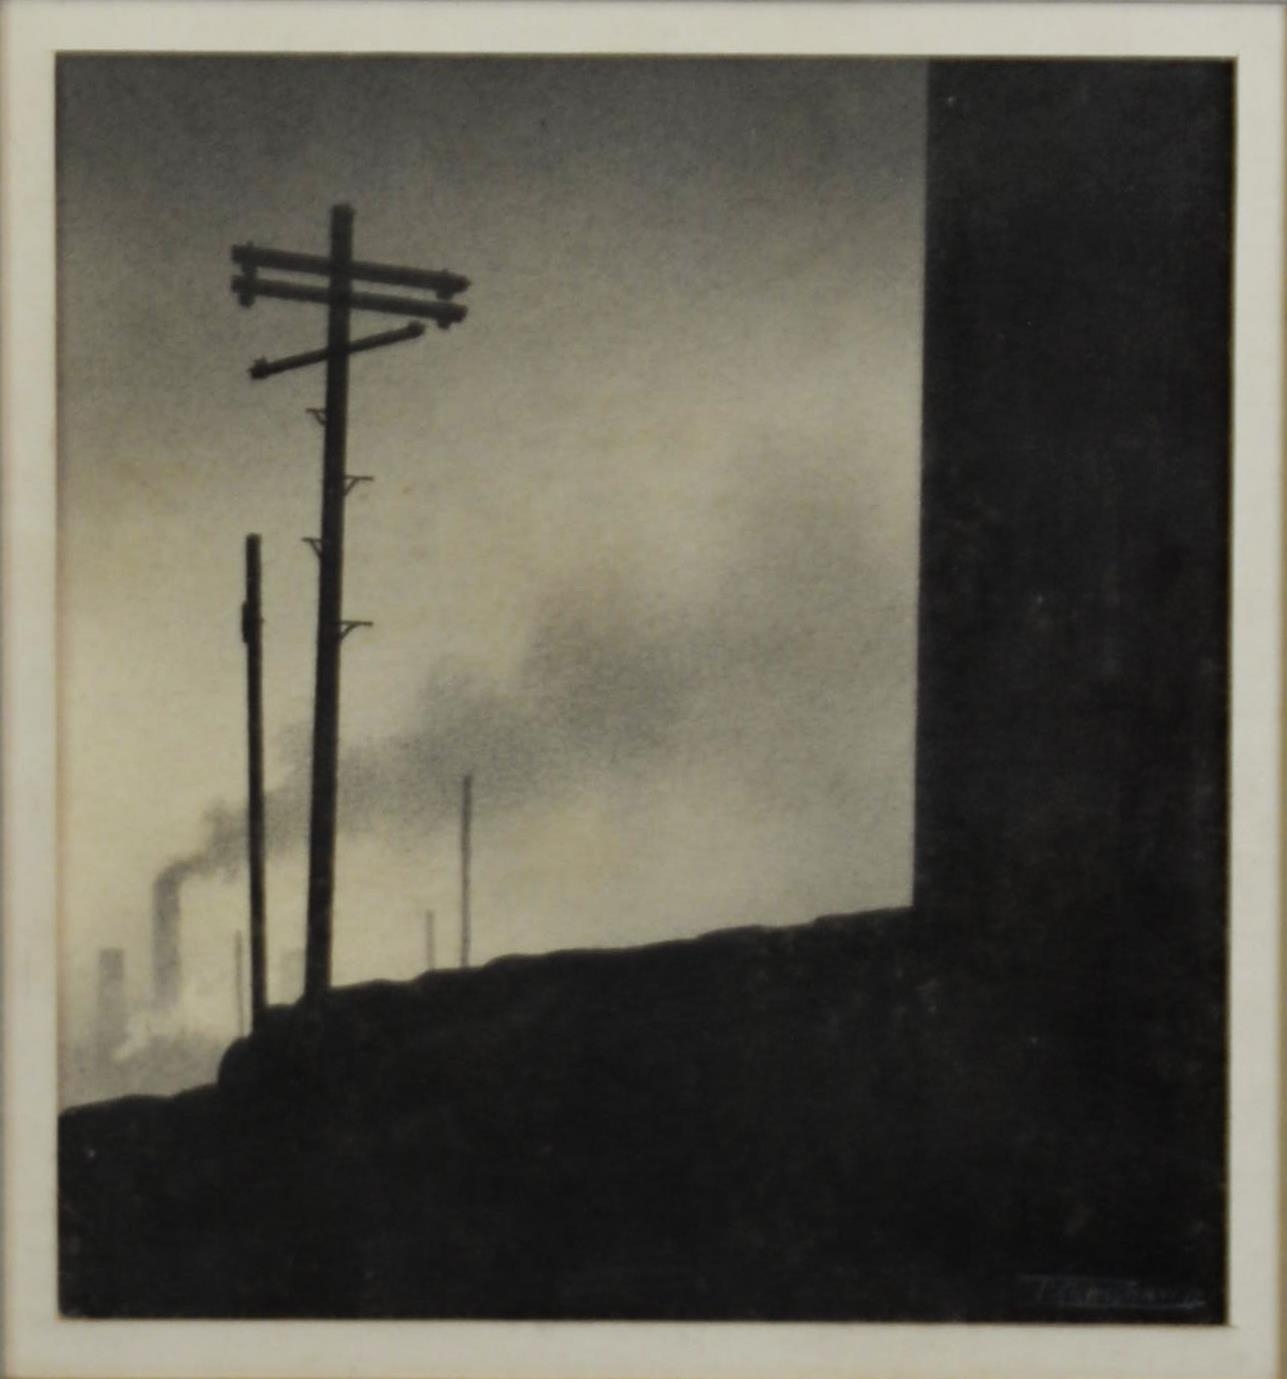 TREVOR GRIMSHAW (1947-2001) PENCIL DRAWING ‘Beyond the Houses’, Industrial landscape with